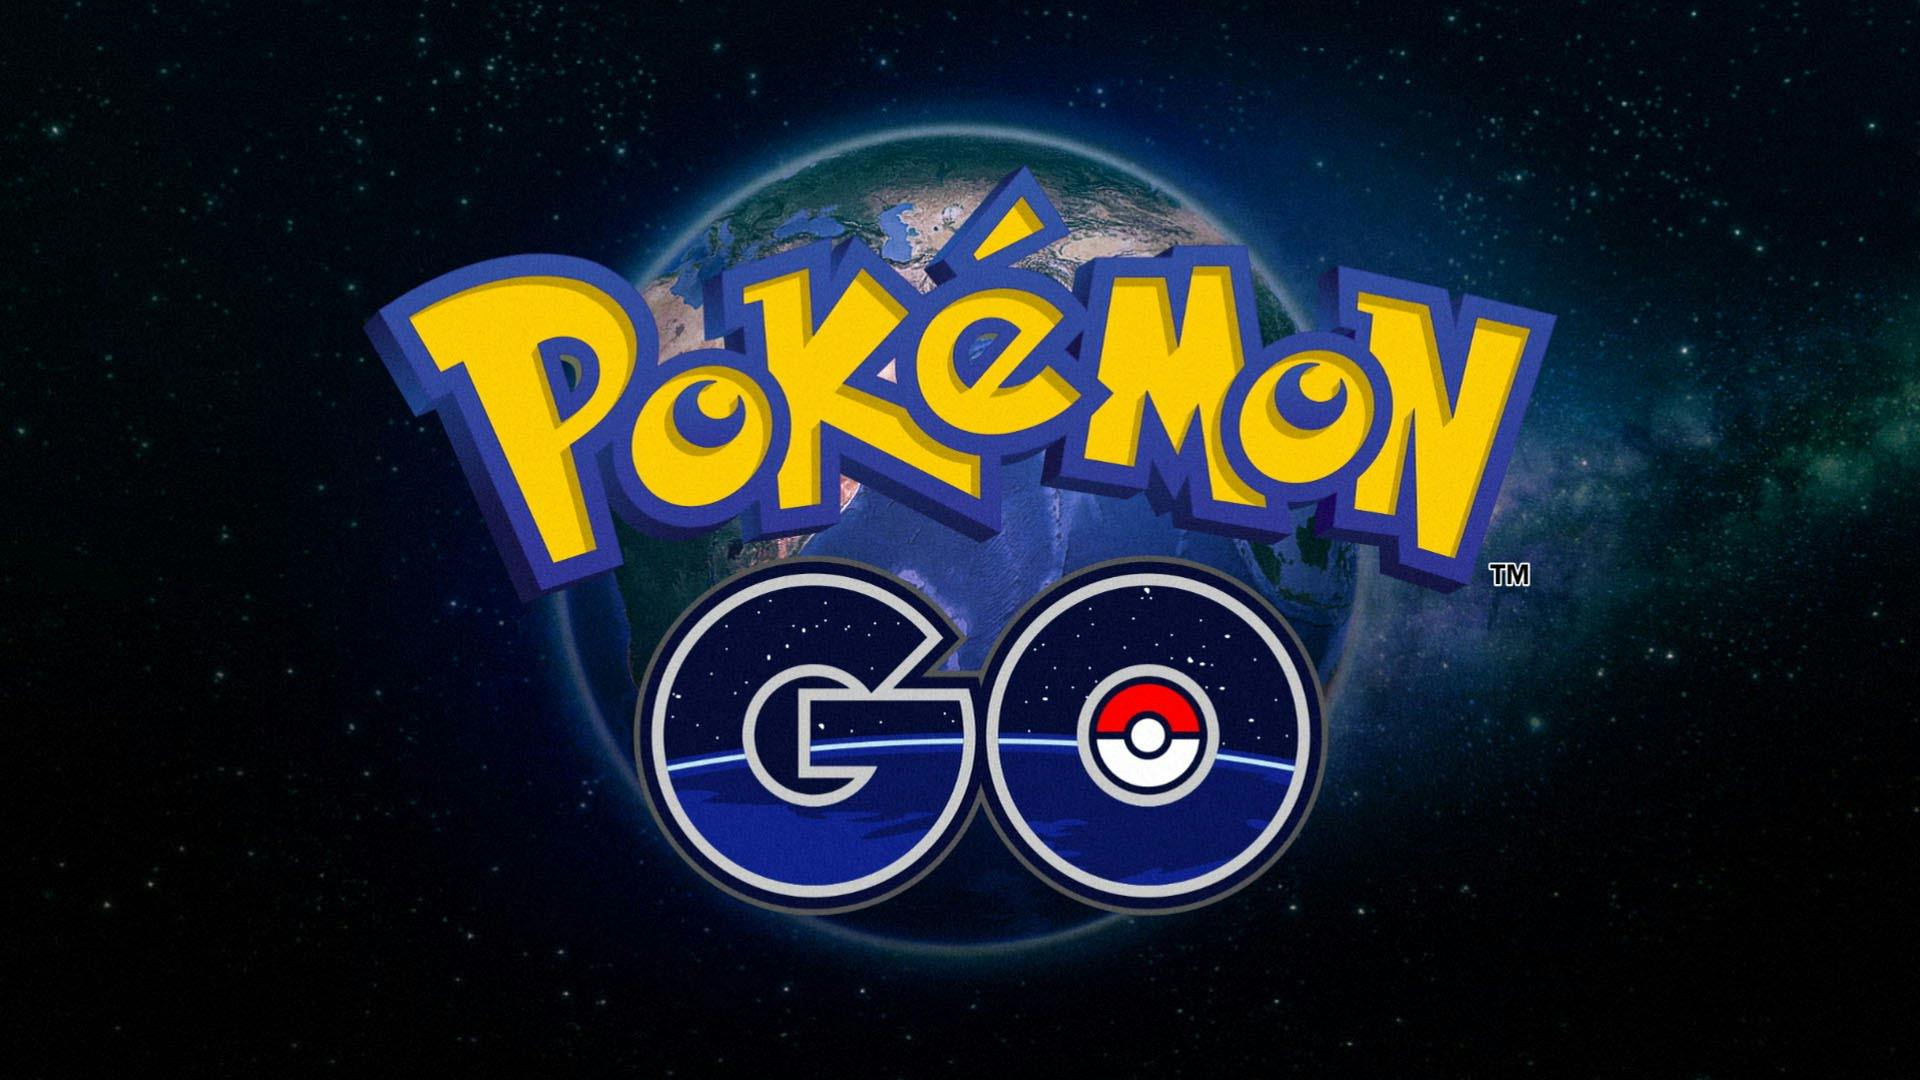 Pokemon GO App paves way for virtual and augmented reality